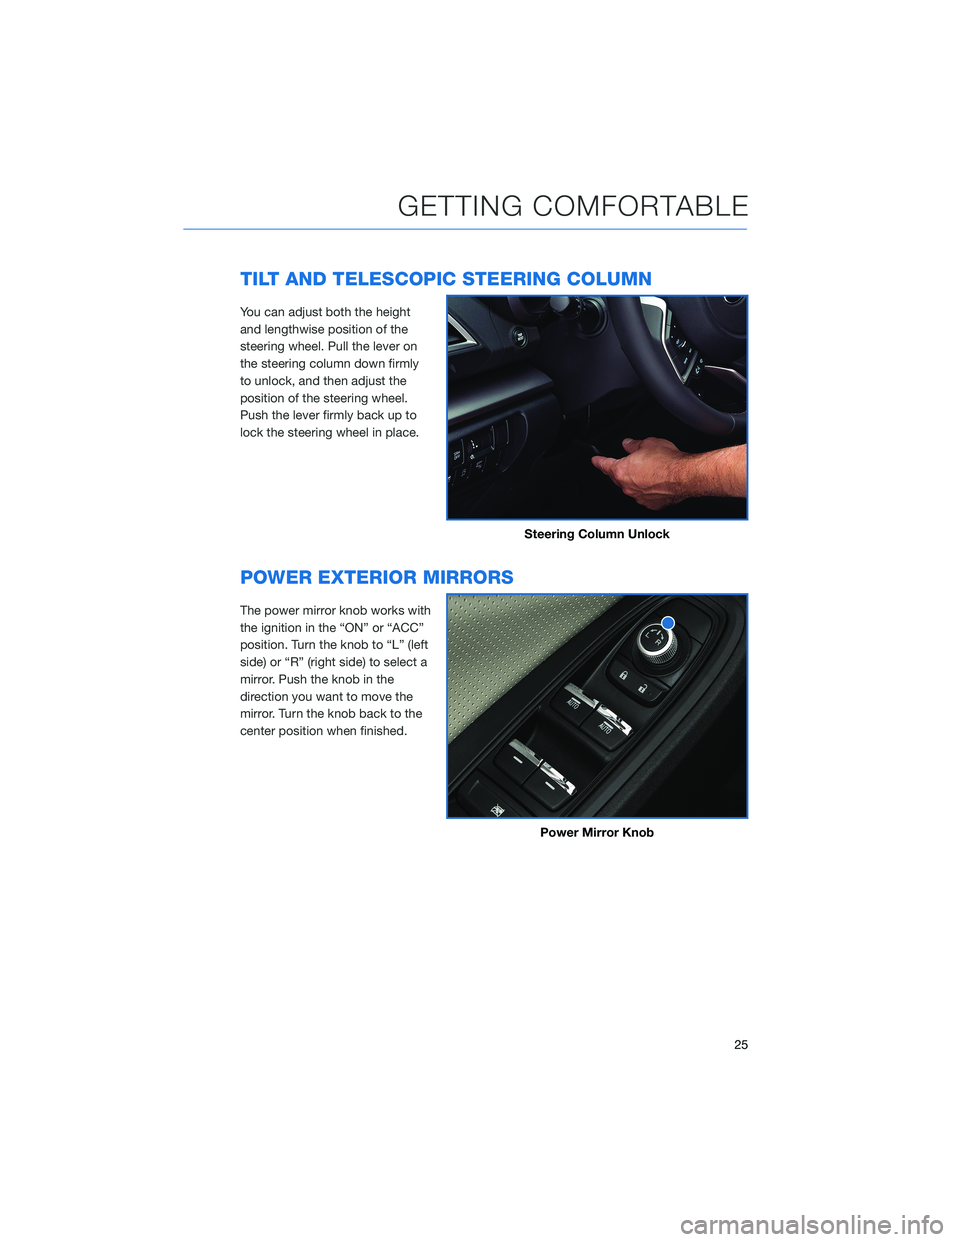 SUBARU IMPREZA 2022  Getting Started Guide TILT AND TELESCOPIC STEERING COLUMN
You can adjust both the height
and lengthwise position of the
steering wheel. Pull the lever on
the steering column down firmly
to unlock, and then adjust the
posit